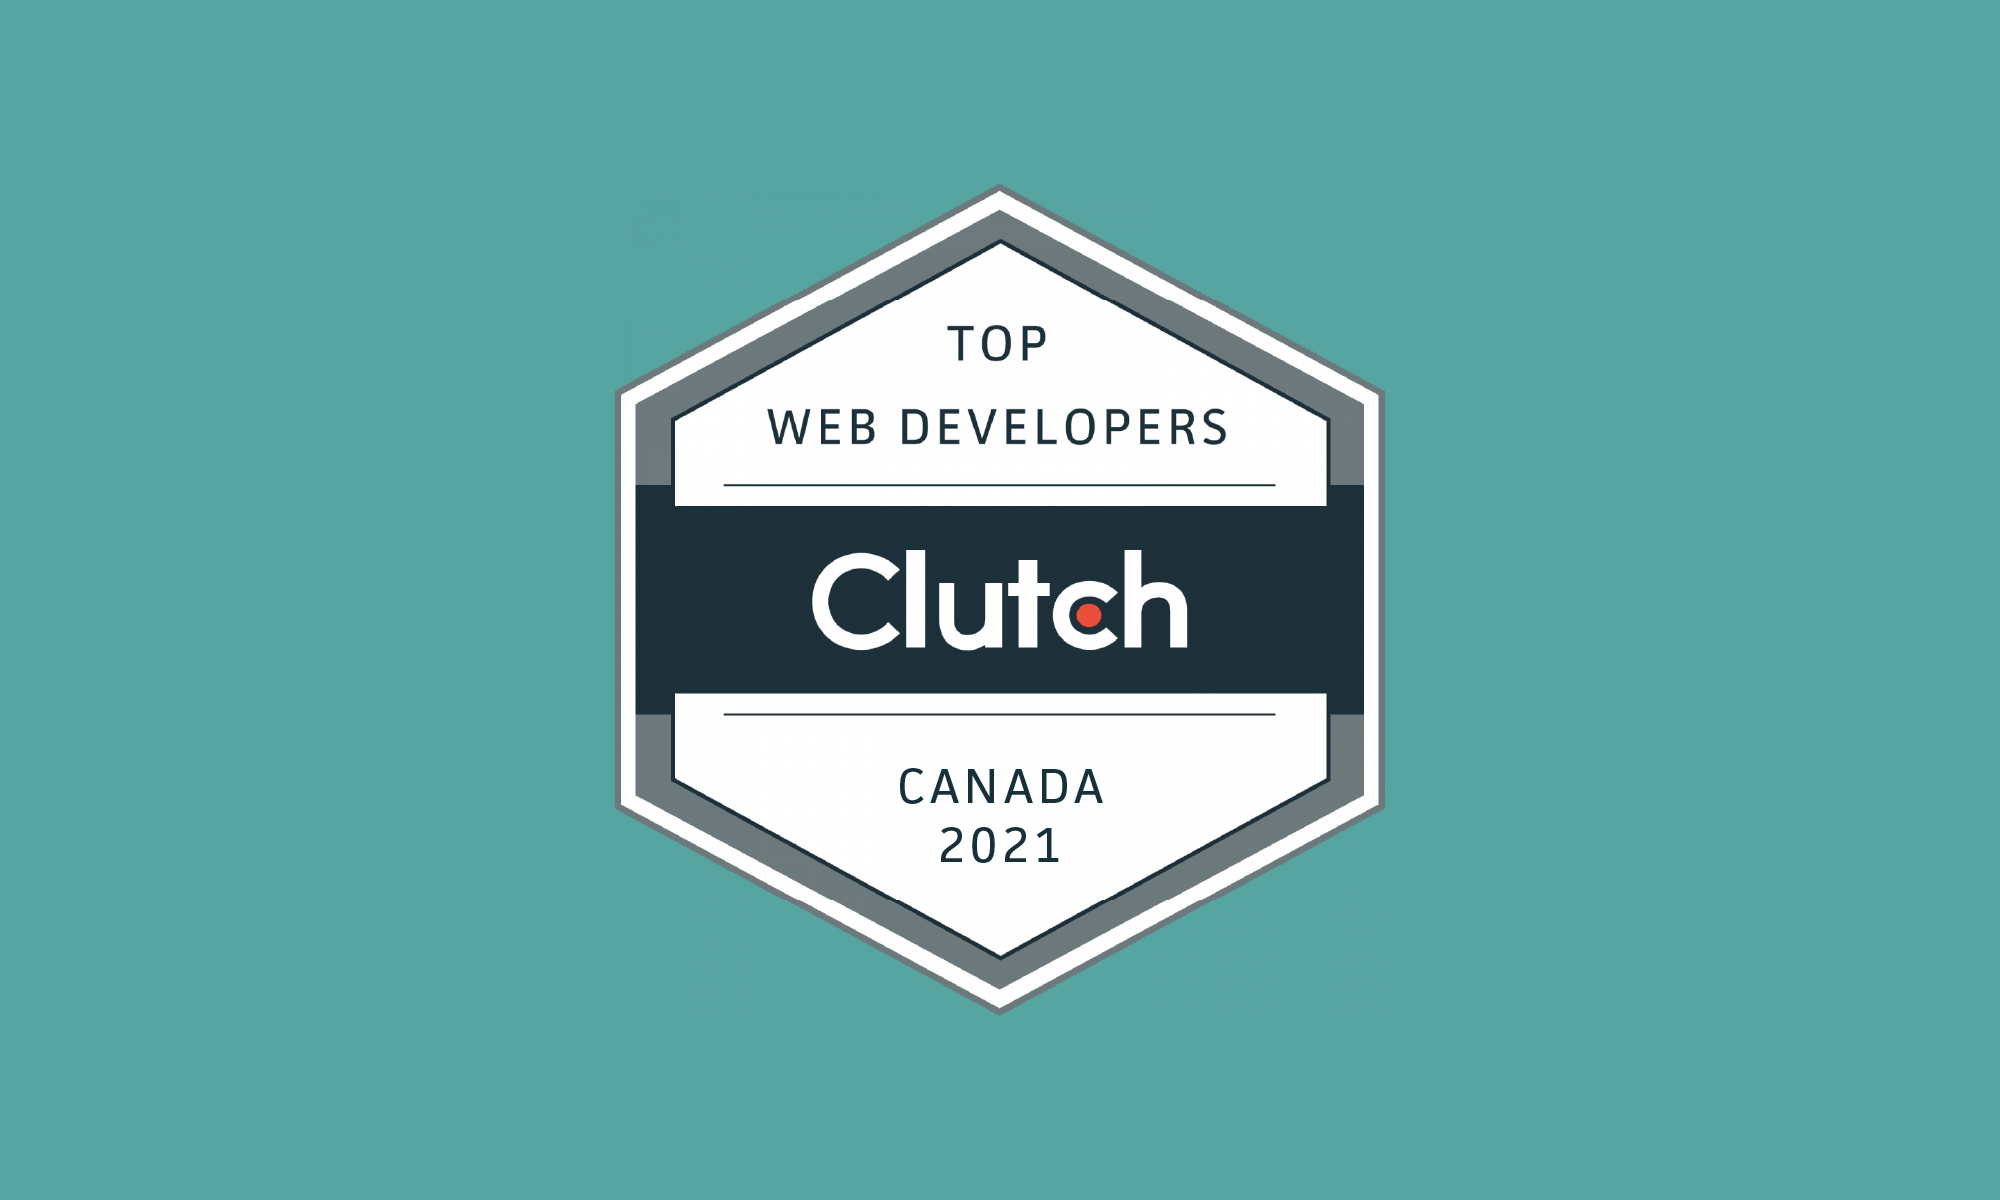 Symetris ranked among top 15 web development leaders in Canada for 2021